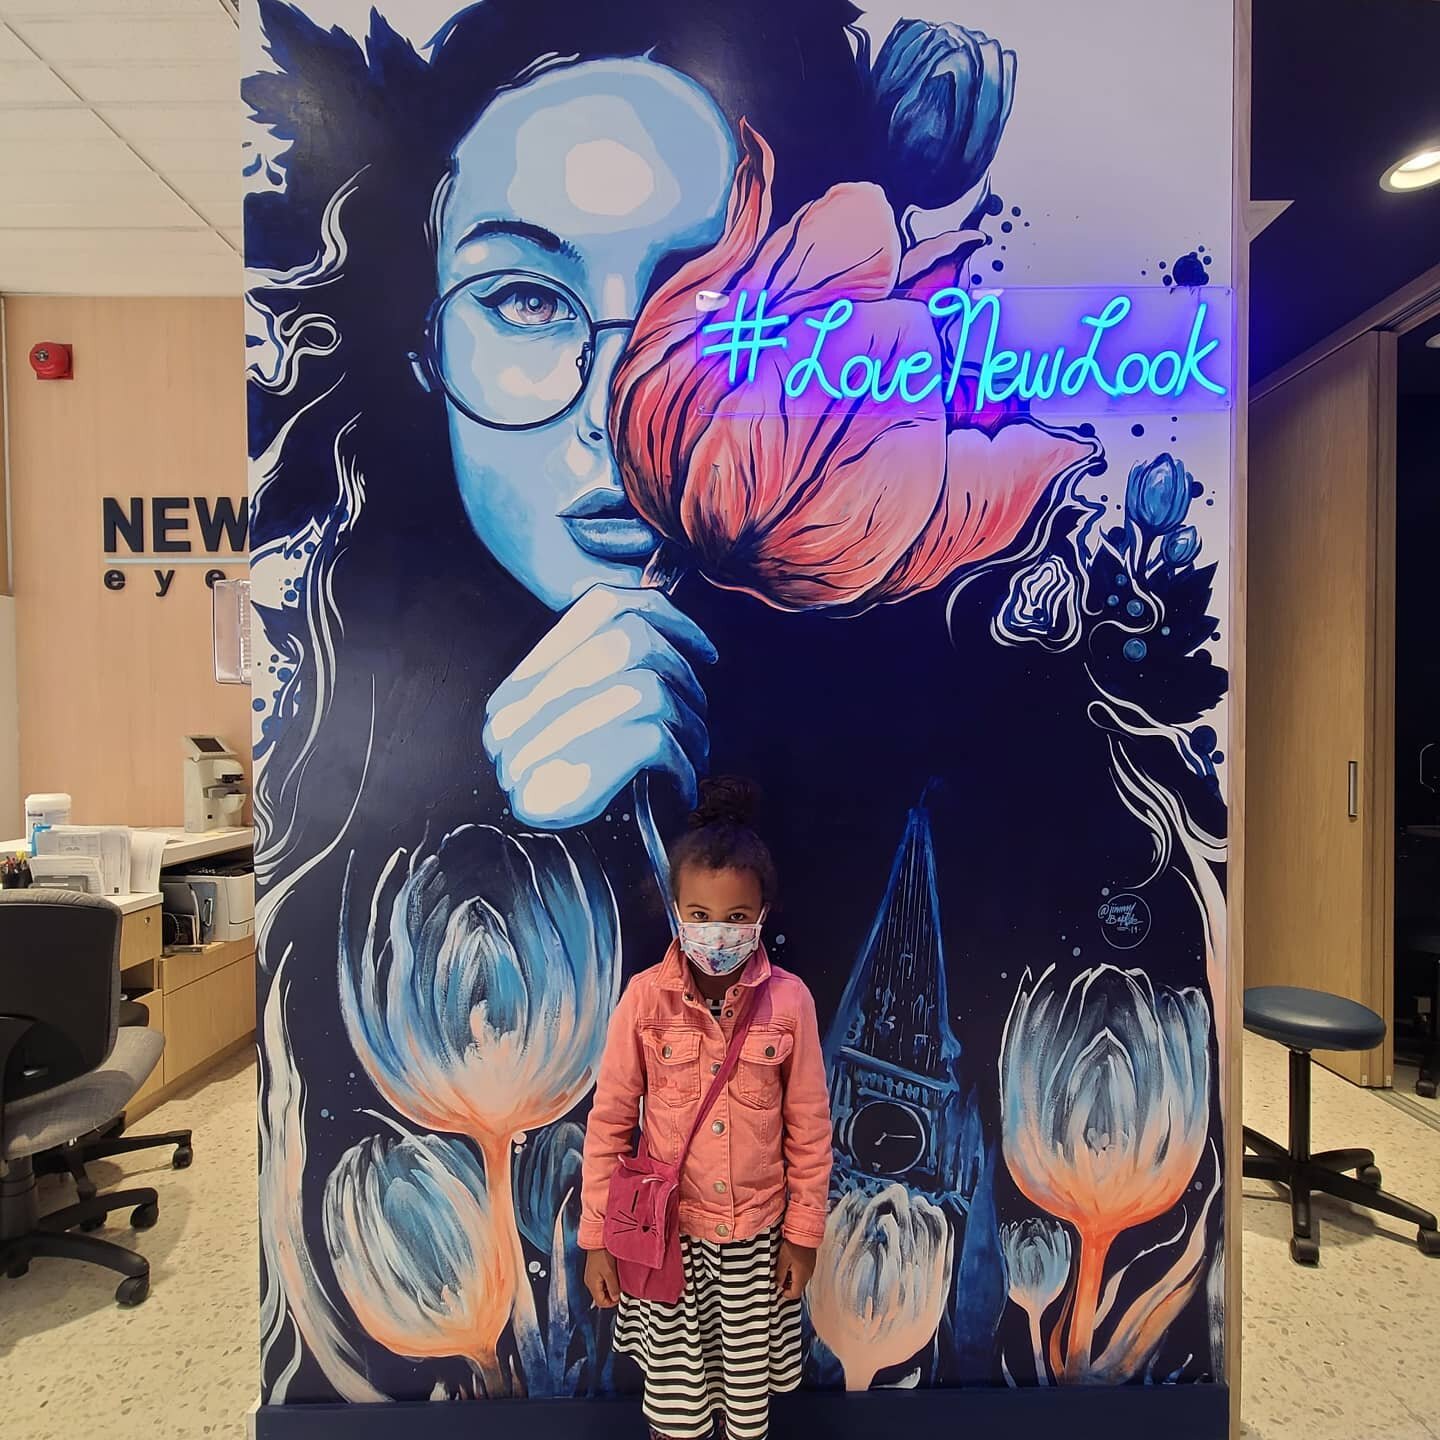 Went mall shopping a few days ago and I took the time to show my first commissioned mural in #Ottawa at the Bayshore Mall to my daughter. 

Thank you @newlook.ca for the opportunity. 

#jimmybaptiste 
#lovenewlook
#mural #art #design